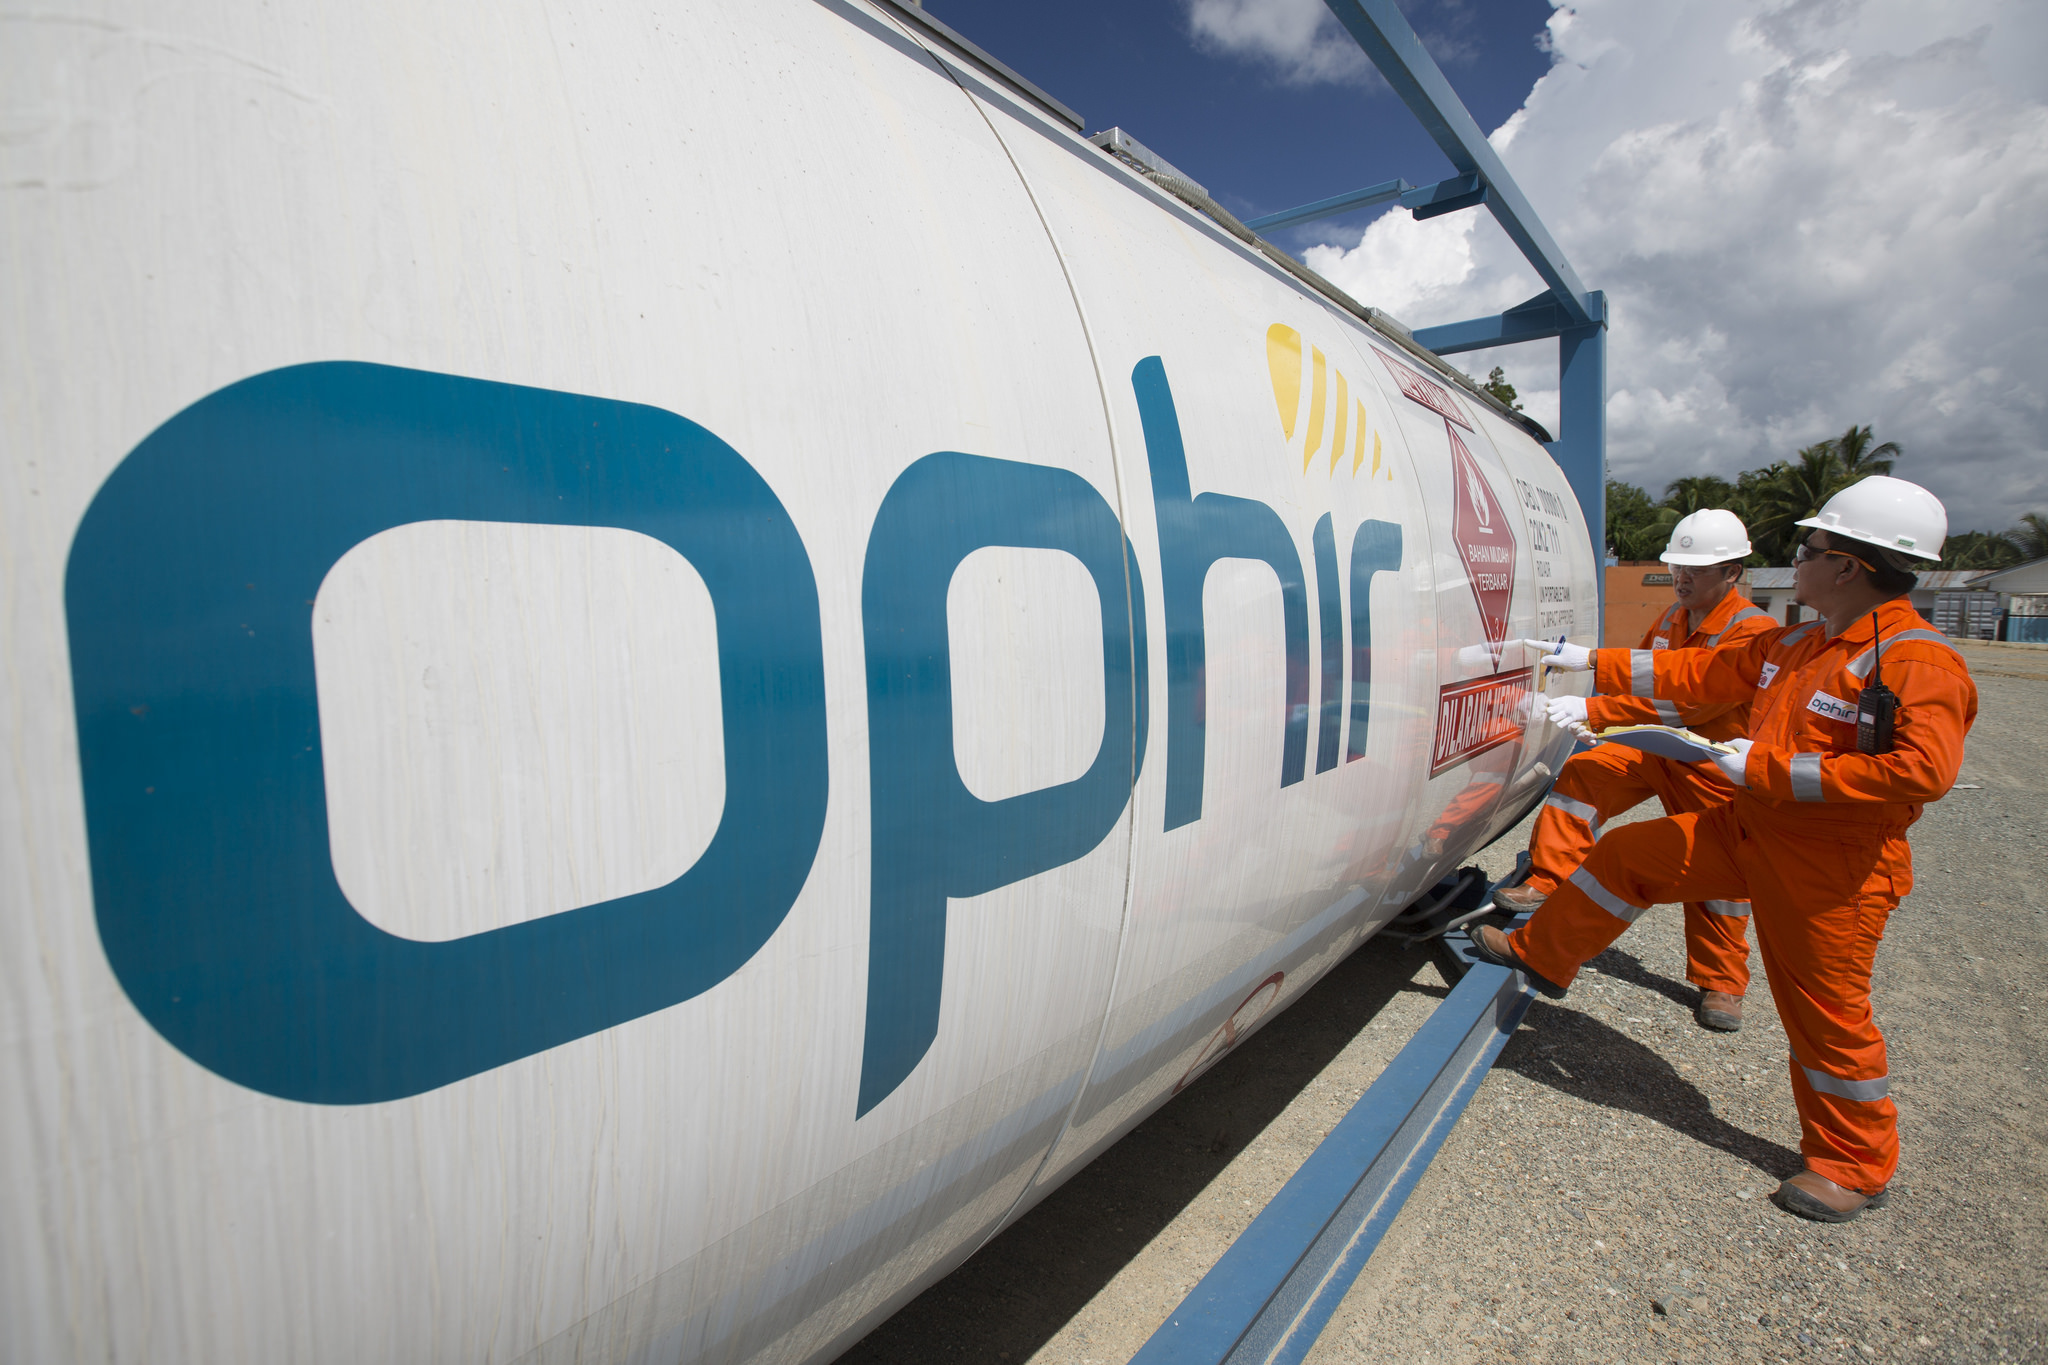 Ophir's 2018 revenue up on rising production volumes